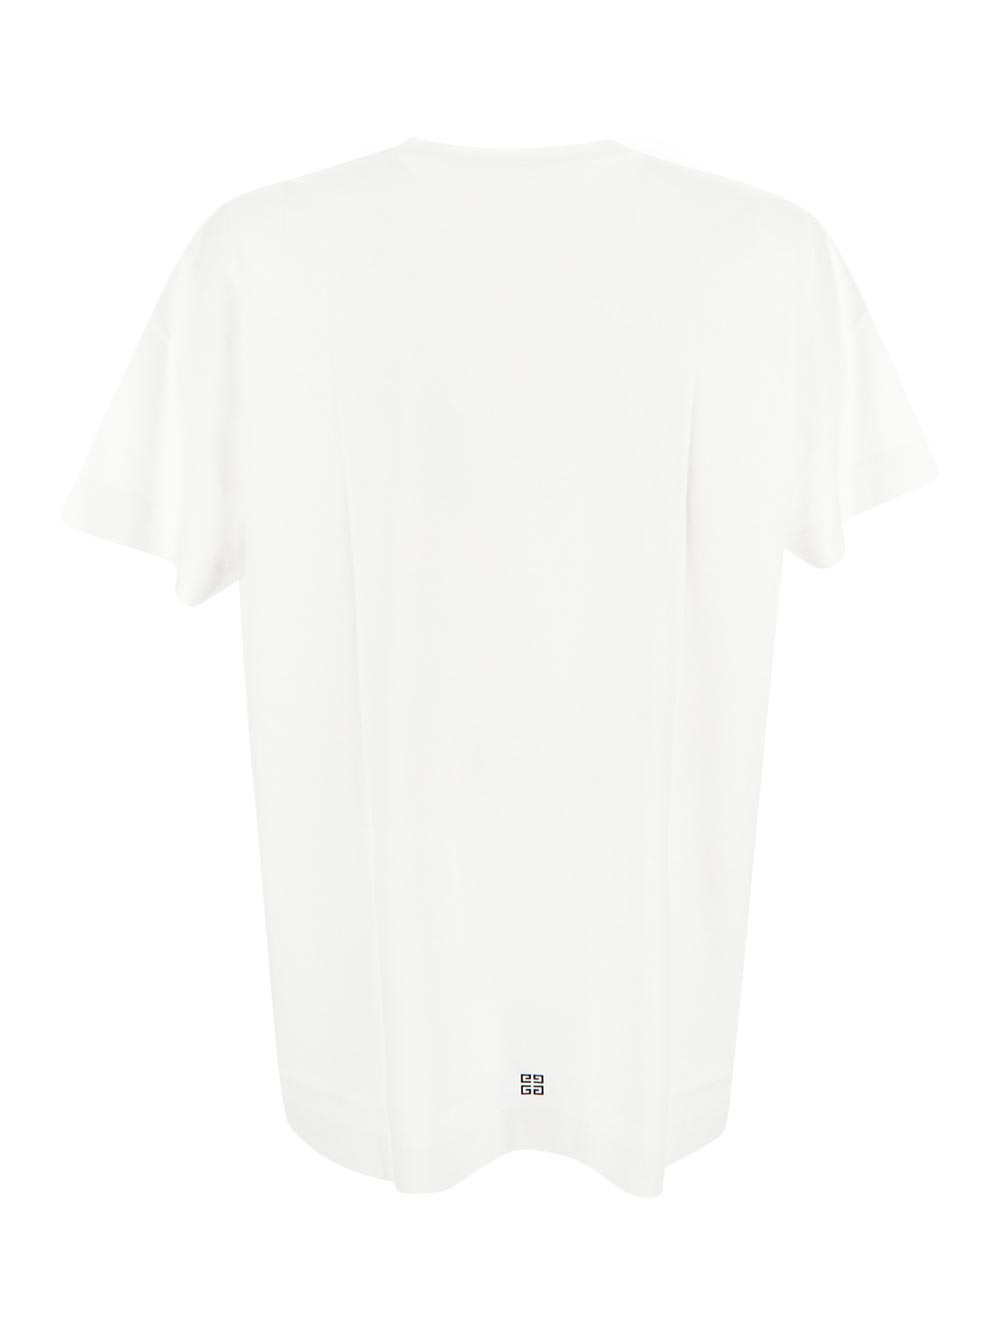 Givenchy Archetype Oversized T-Shirt In Cotton